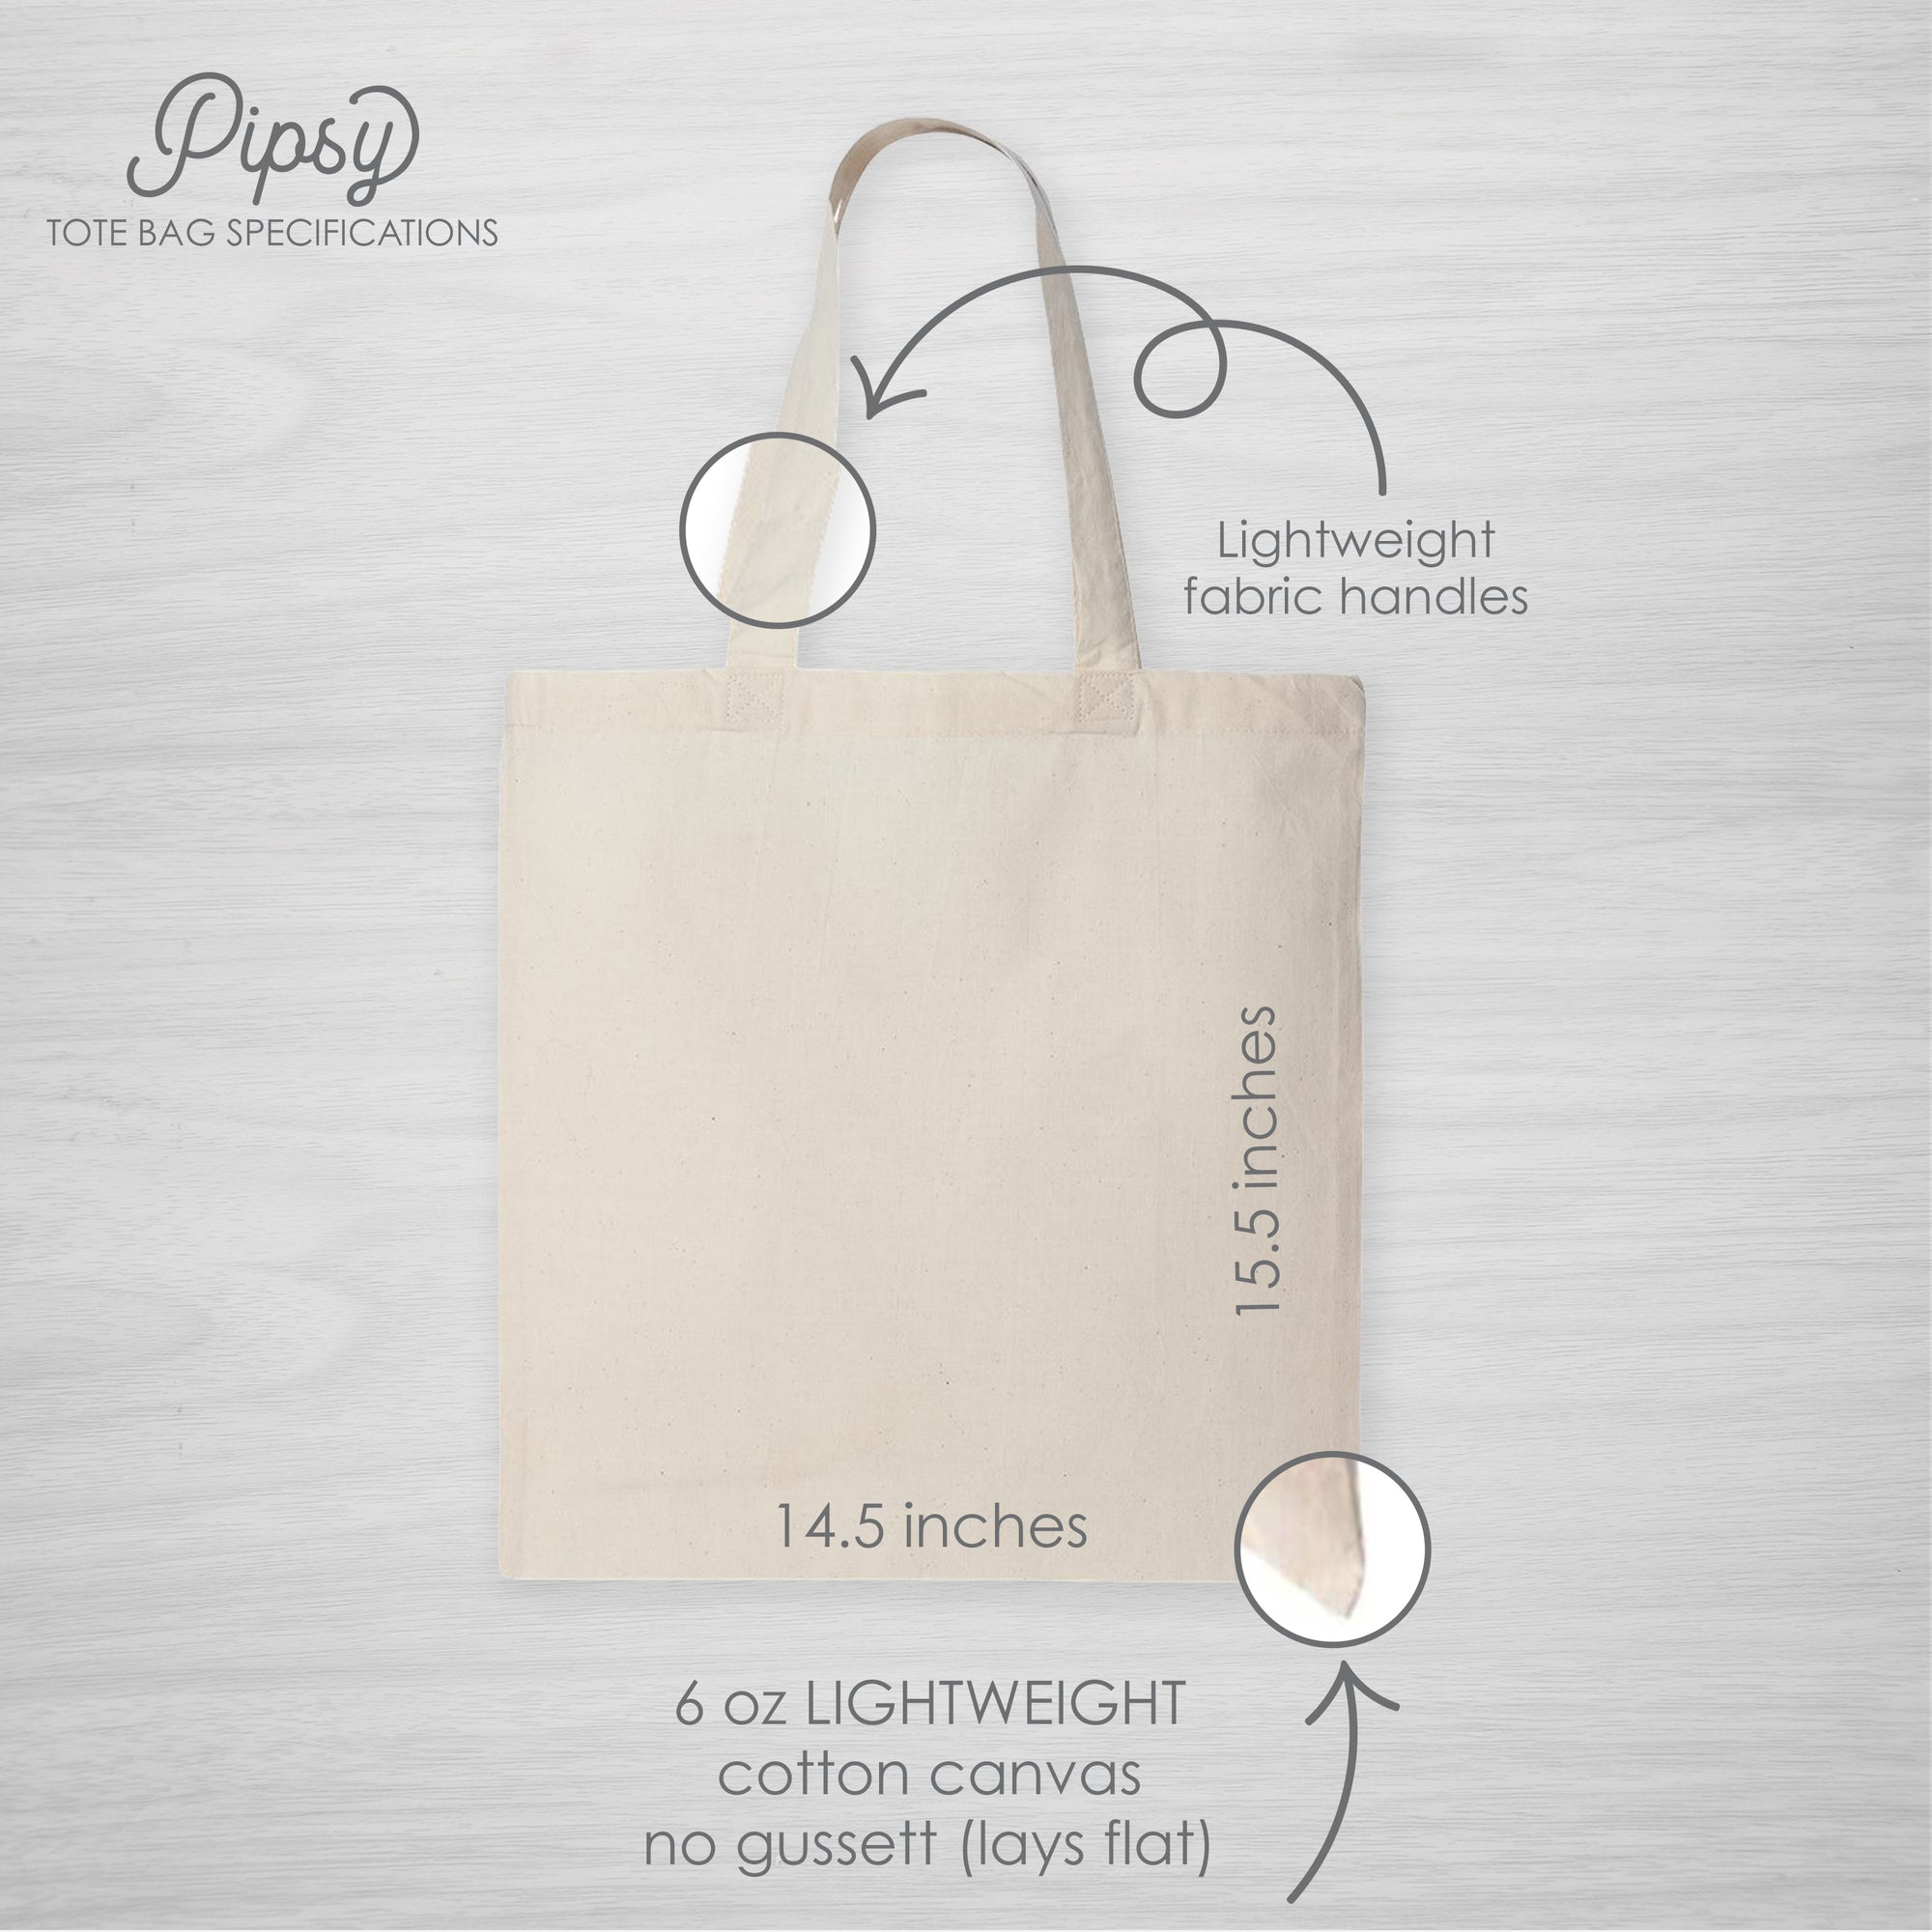 Tote bag specifications and size